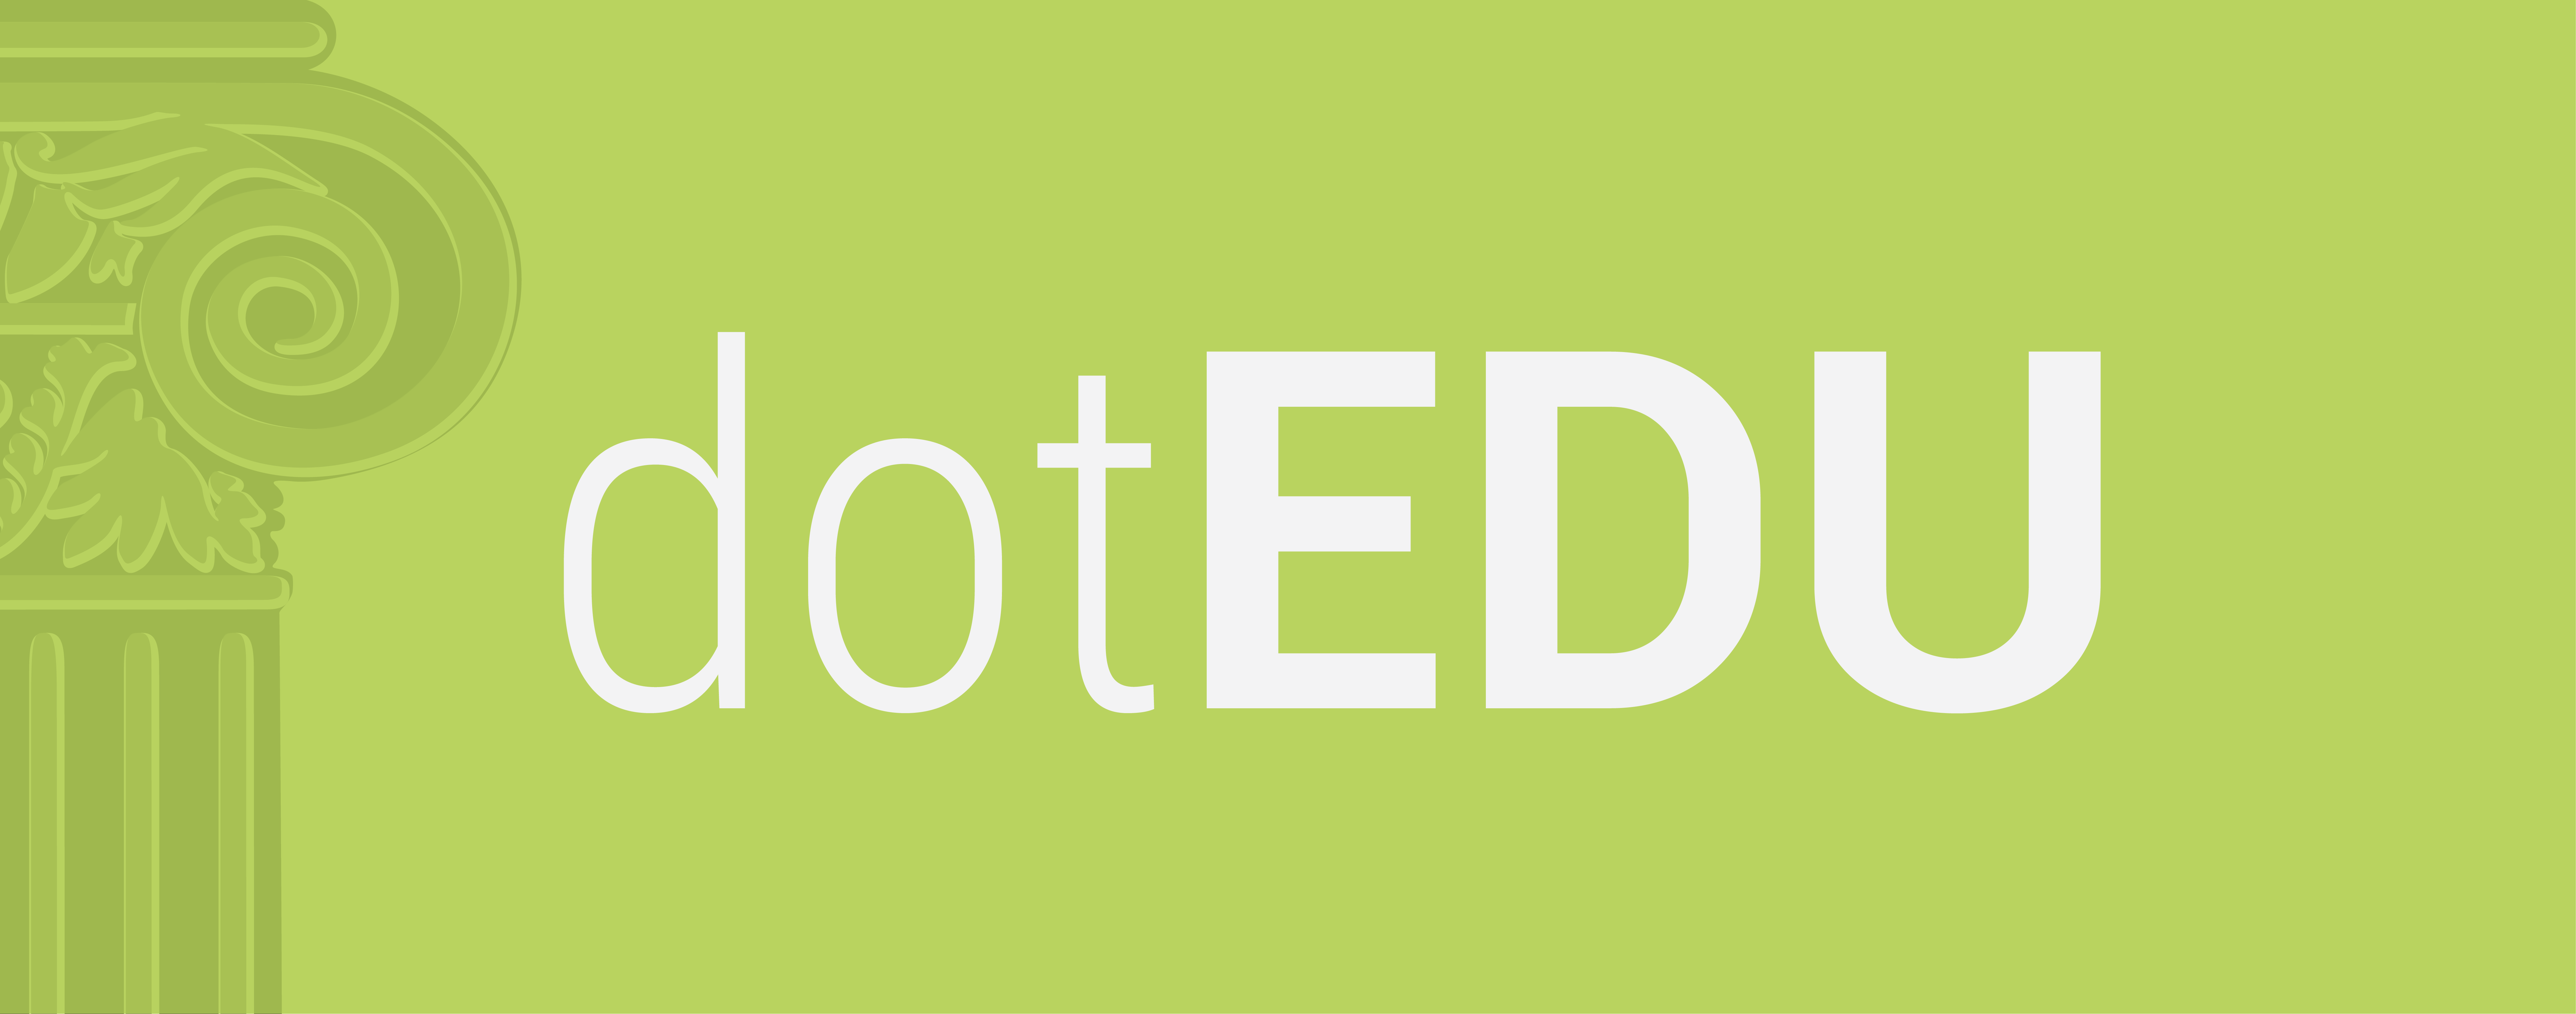 dotEDU Live: Is Higher Education Act Reauthorization Finally Happening?